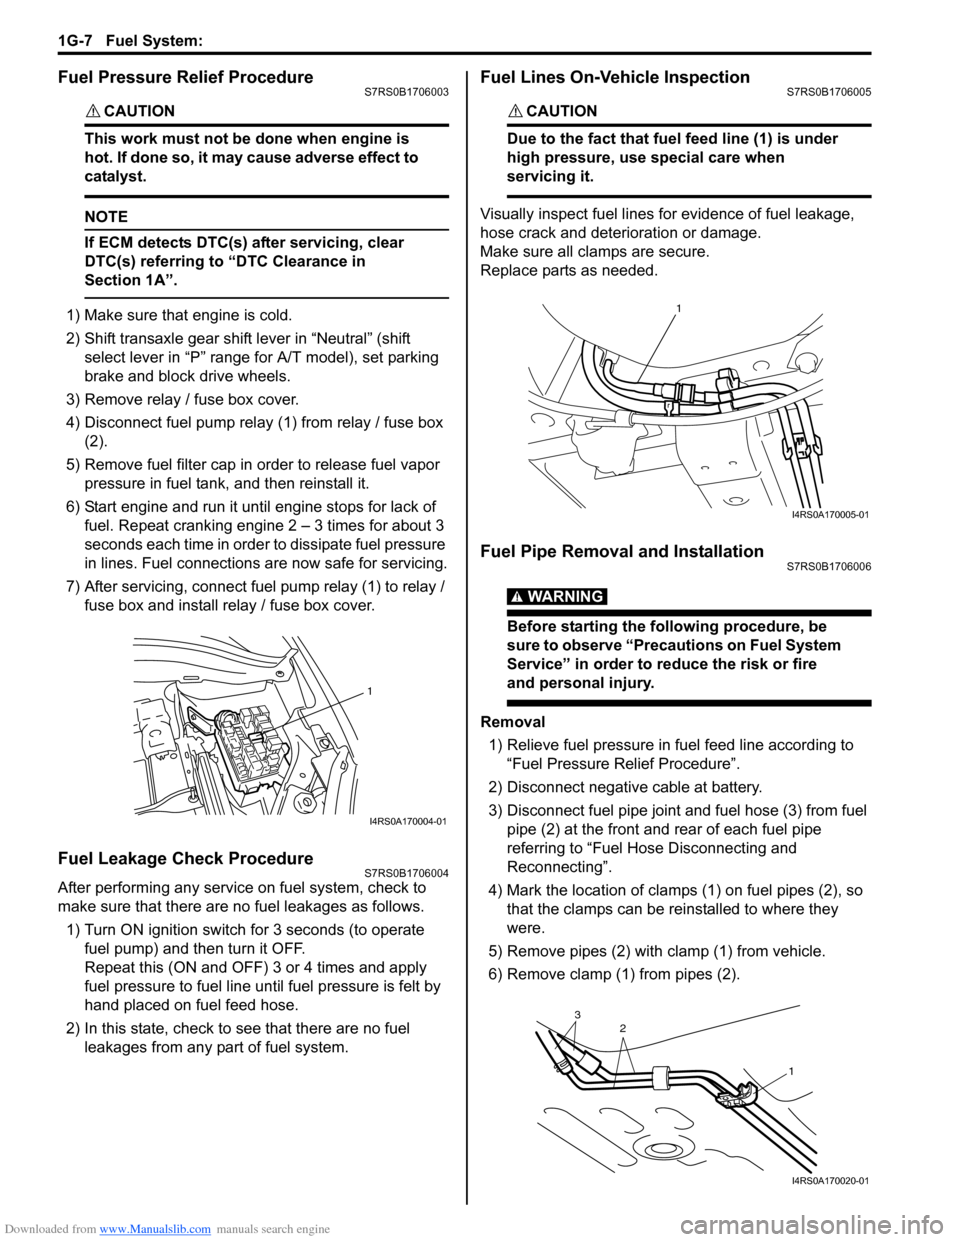 SUZUKI SWIFT 2007 2.G Service Workshop Manual Downloaded from www.Manualslib.com manuals search engine 1G-7 Fuel System: 
Fuel Pressure Relief ProcedureS7RS0B1706003
CAUTION! 
This work must not be done when engine is 
hot. If done so, it may cau